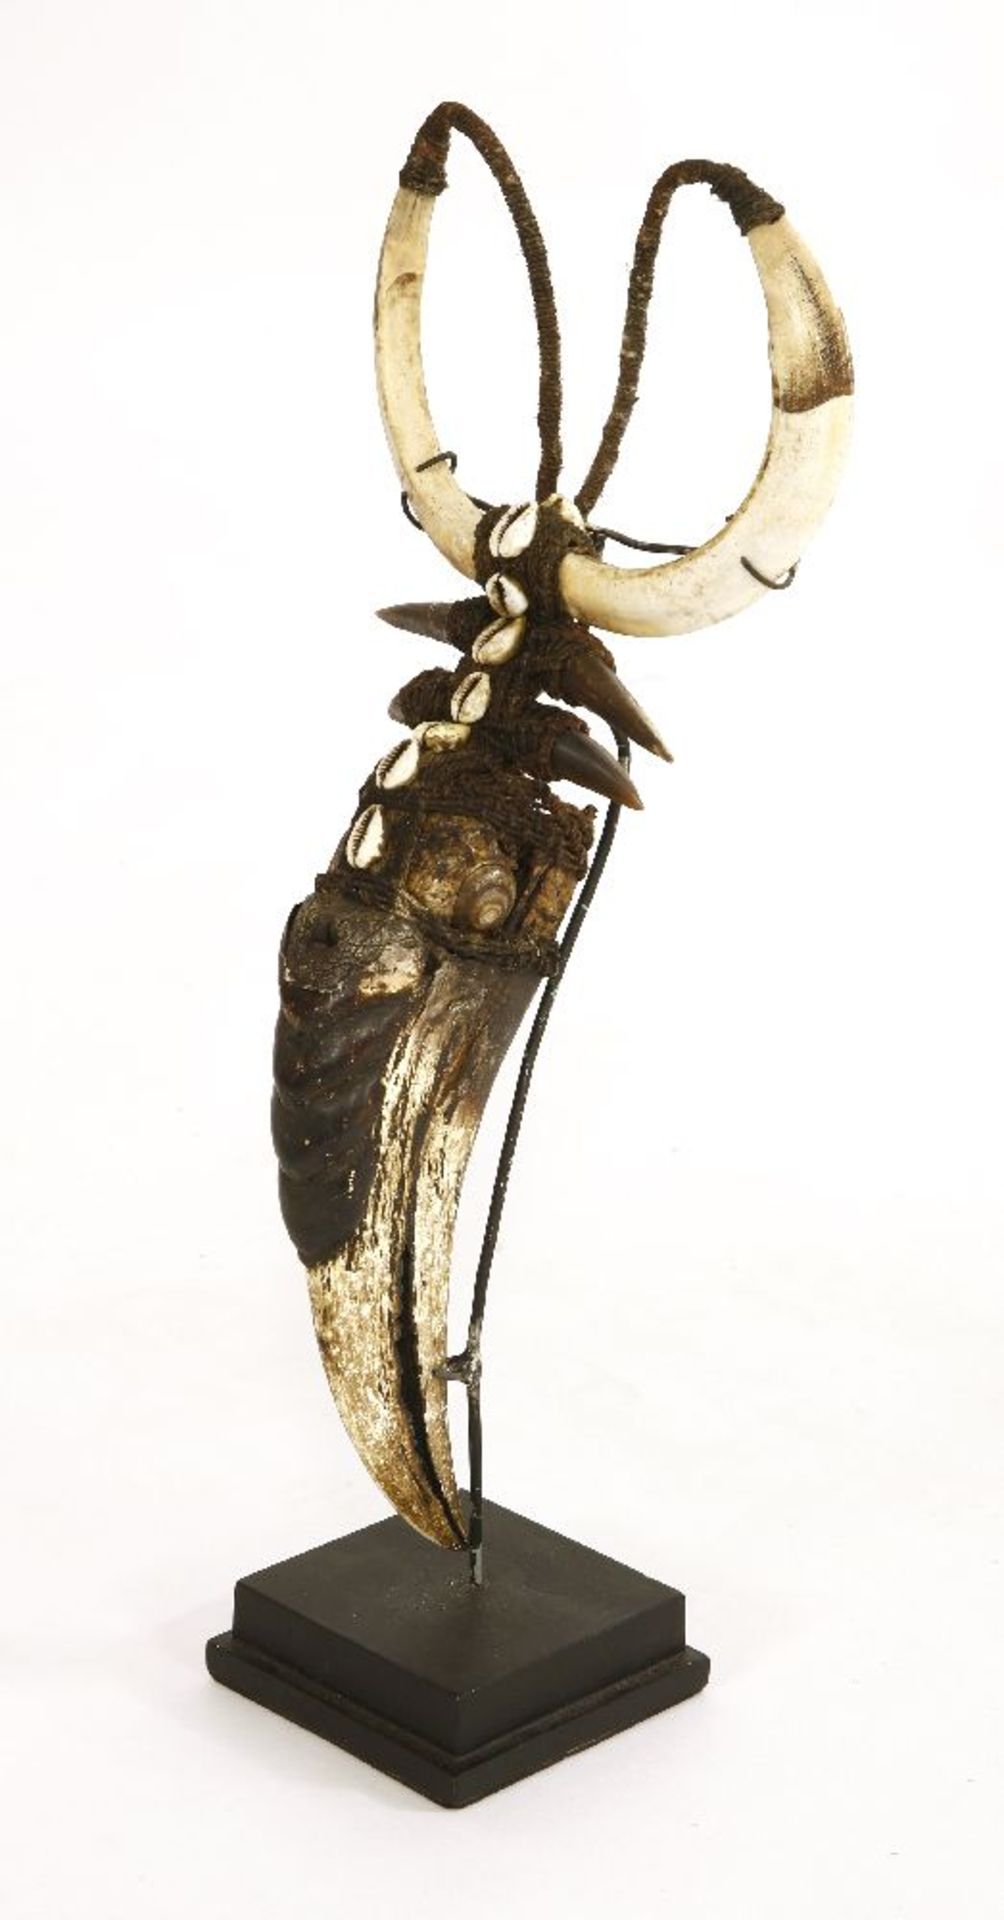 HORNBILL, ¨early 20th century, a tribal necklace incorporating the bill from a hornbill and boar